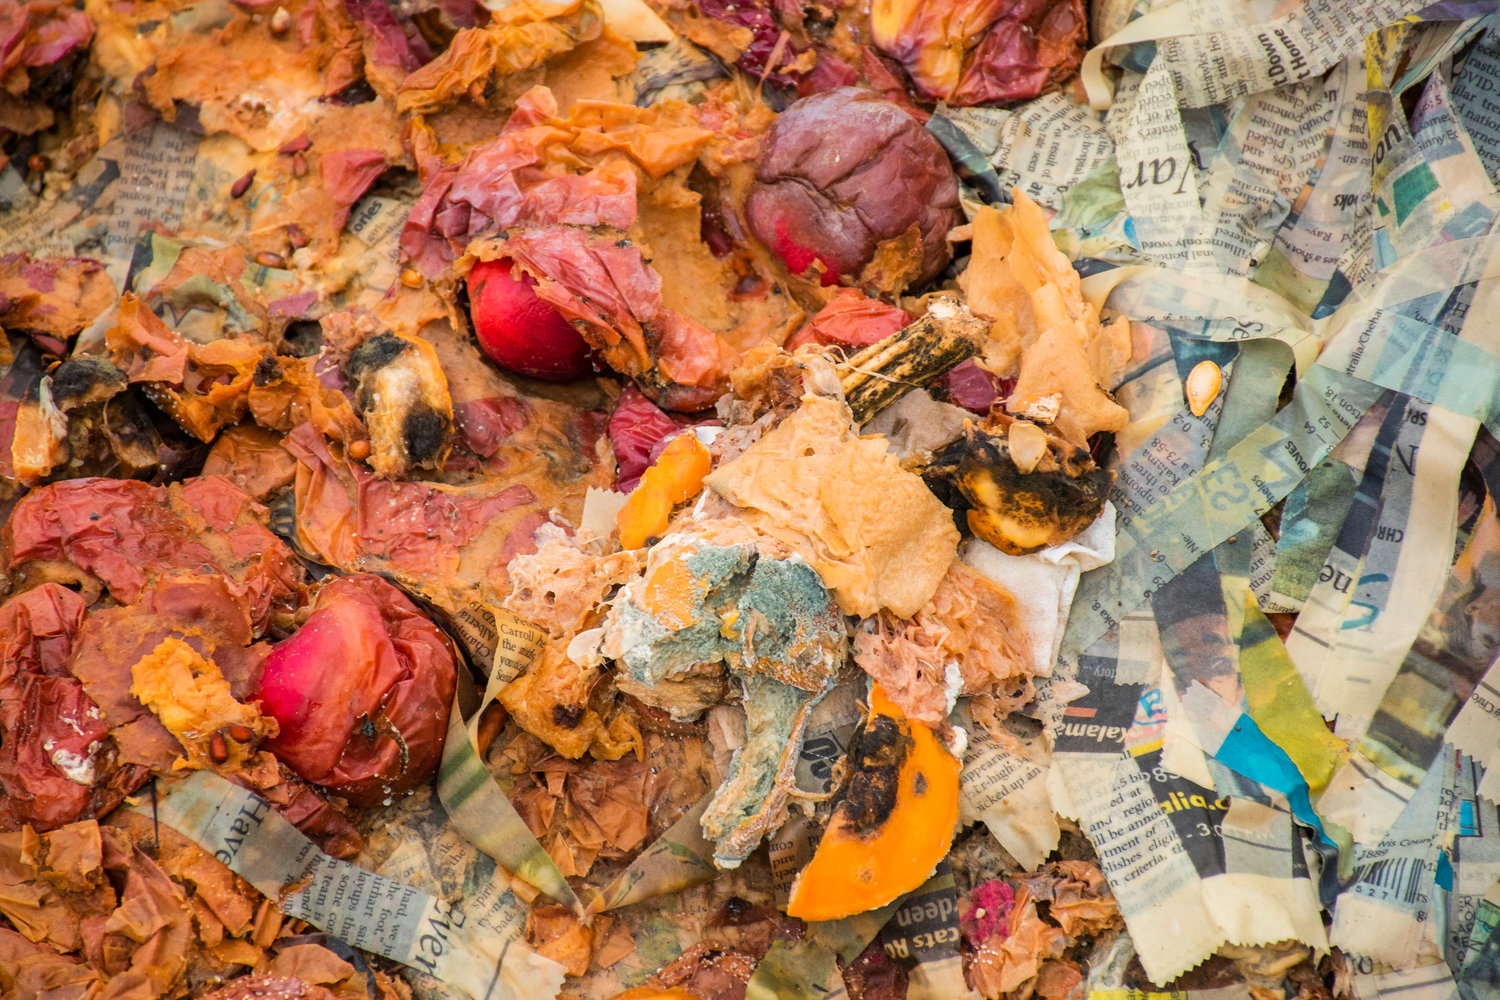 Fruit composted with newspaper clippings is pictured in this file photo.